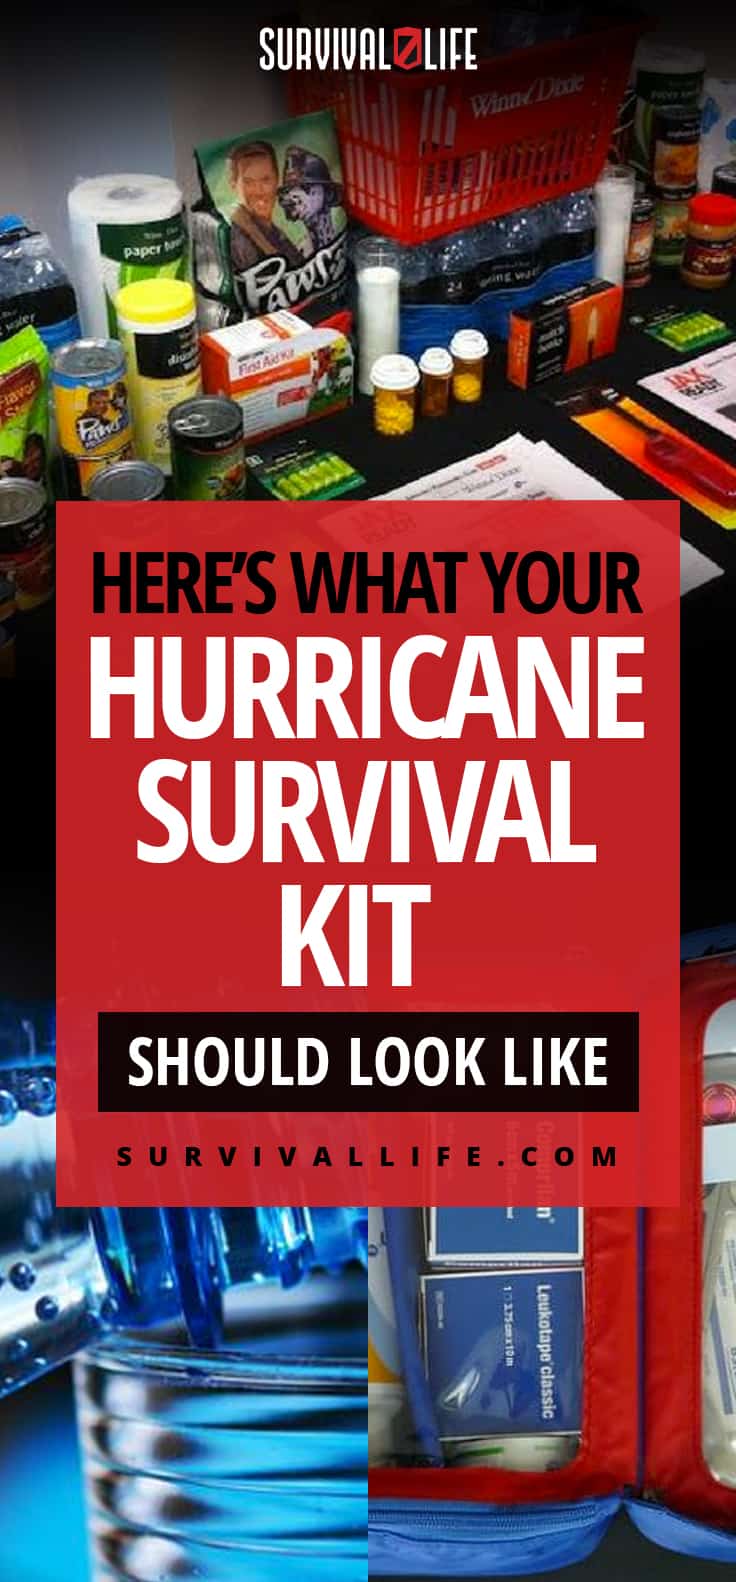 Here’s What Your Hurricane Survival Kit Should Look Like